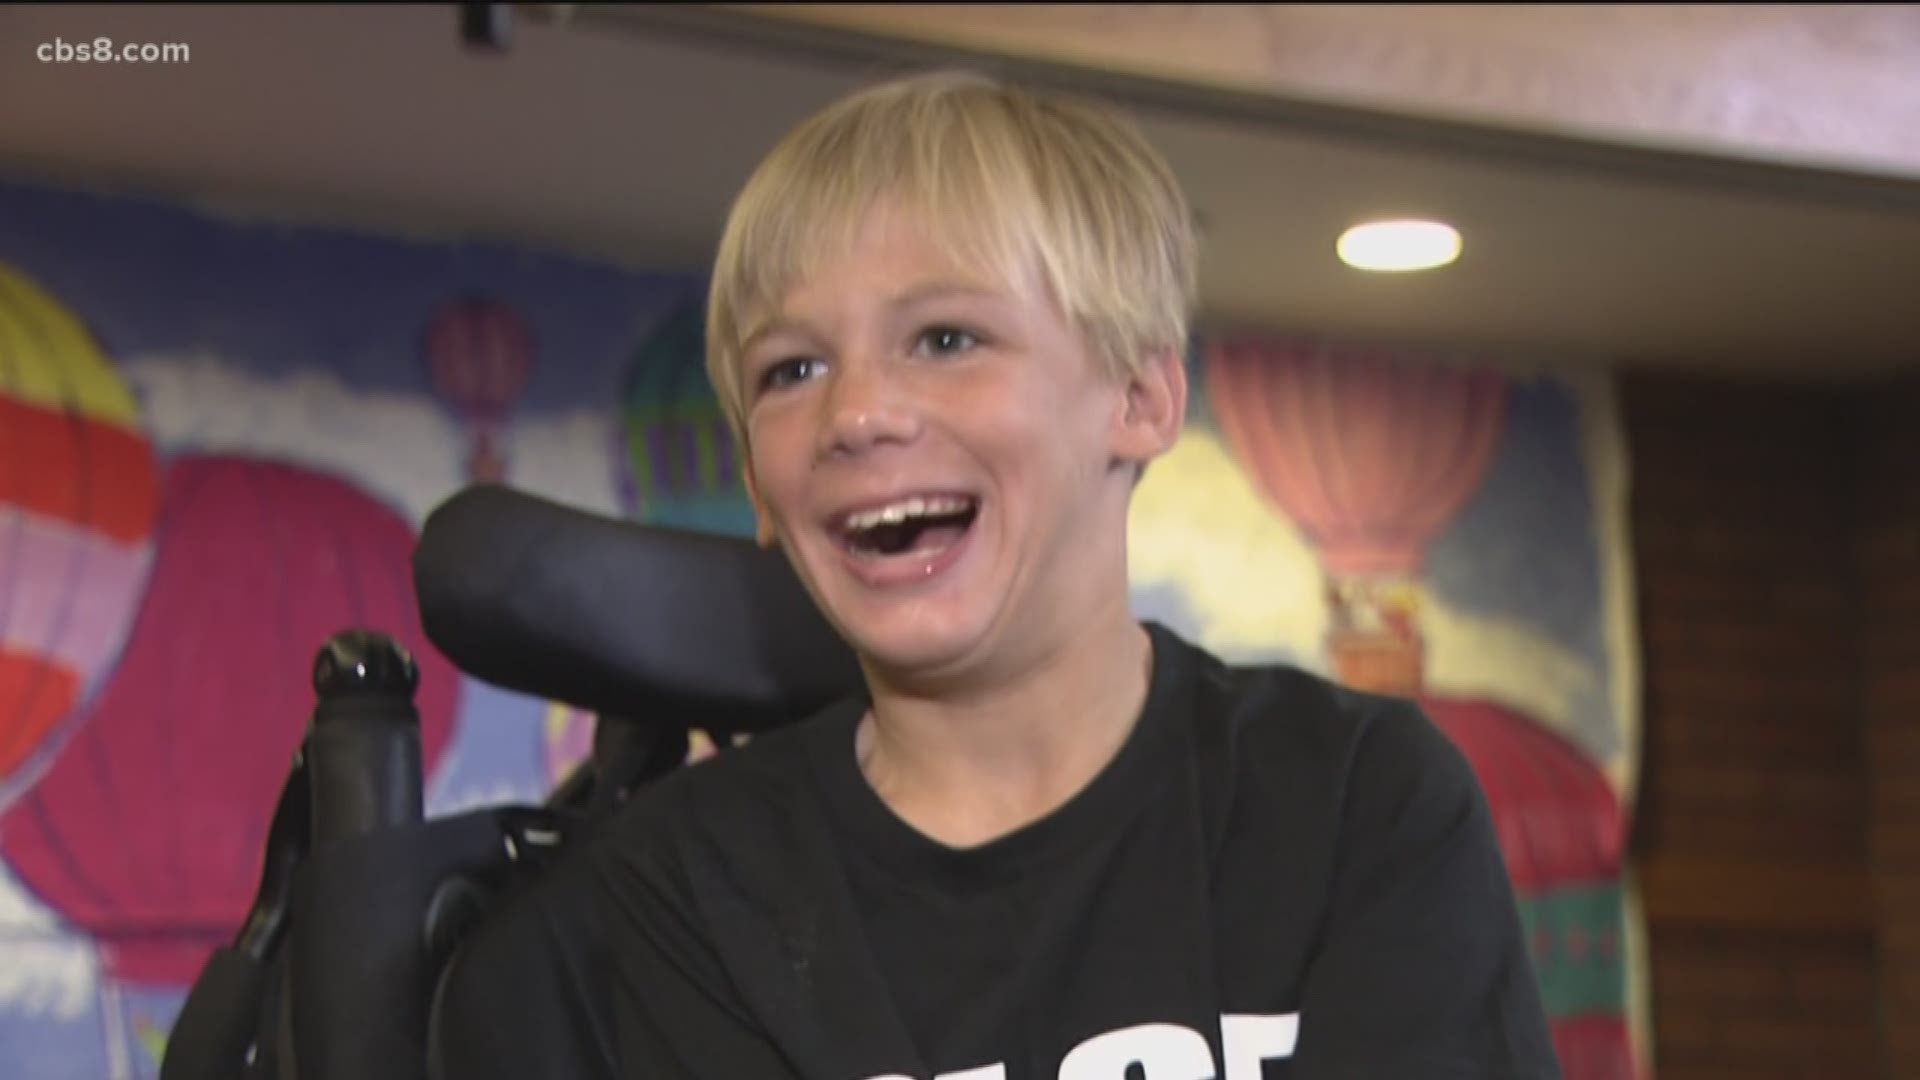 When life tried to knock Laird Murfey down, the third grader with cerebral palsy chose to rise and take the stage.